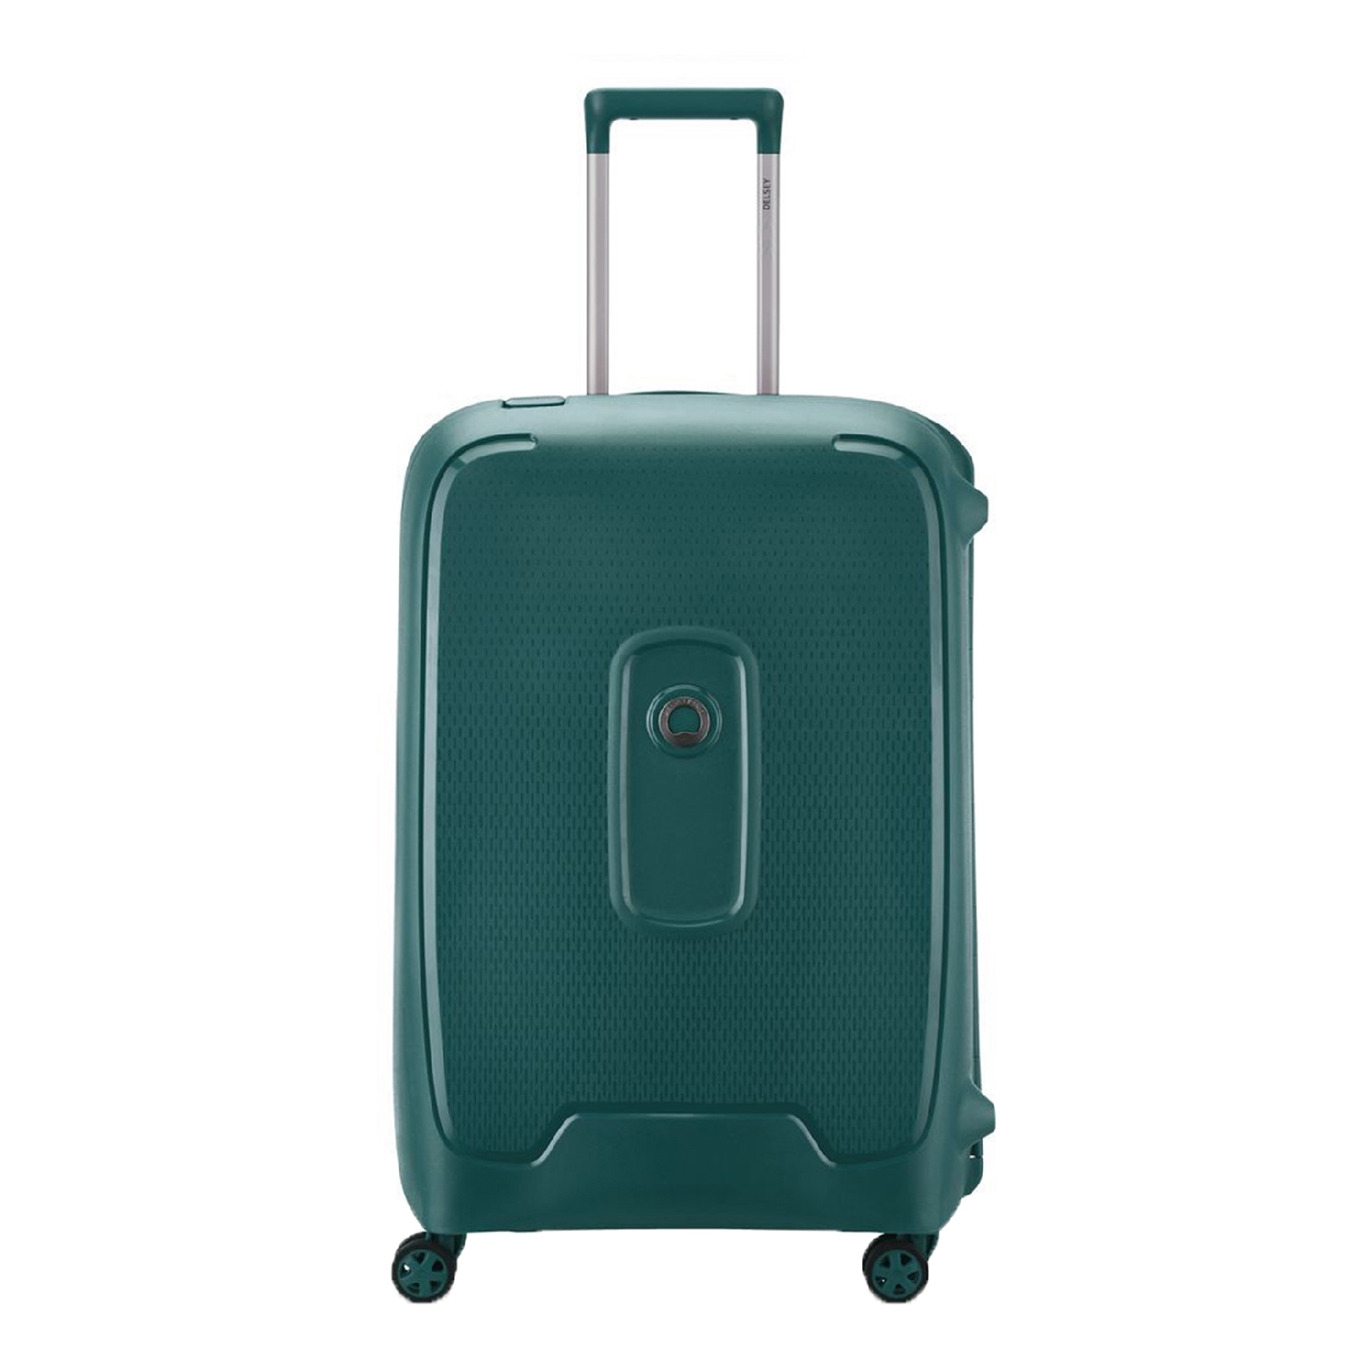 Delsey Moncey 4 Wheel Trolley 69 Green